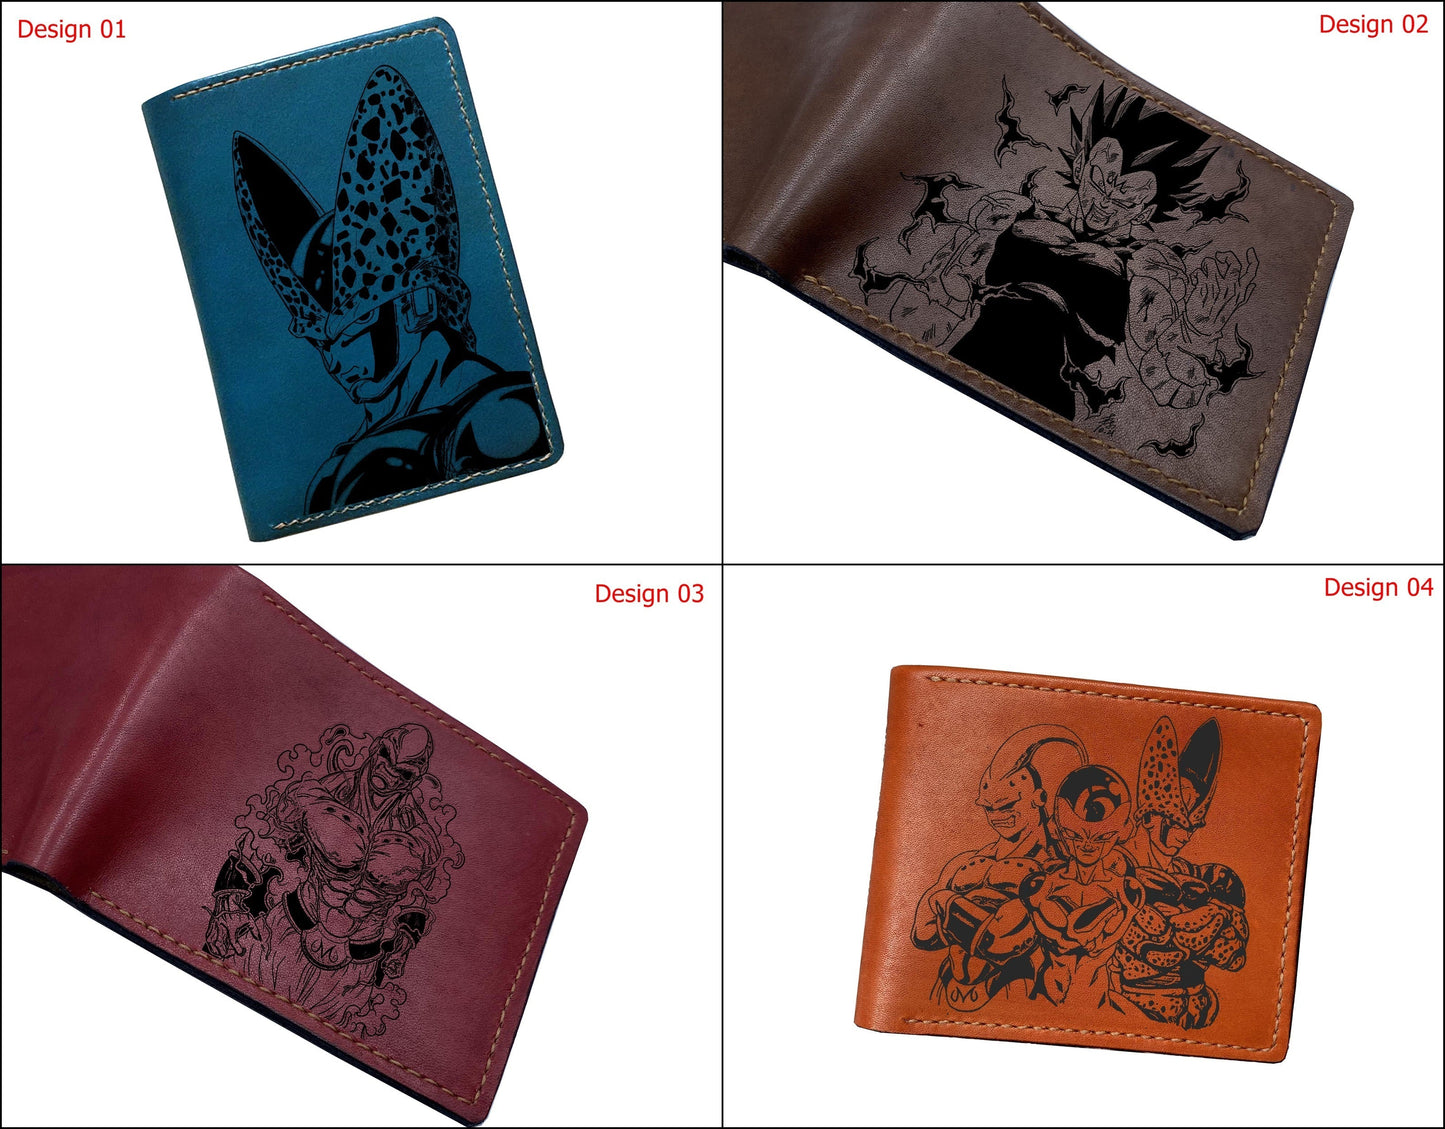 Mayan Corner - Dragon ball characters drawing leather wallet, fan art leather gift for men, wallet for him, leather anniversary present ideas - Freiza